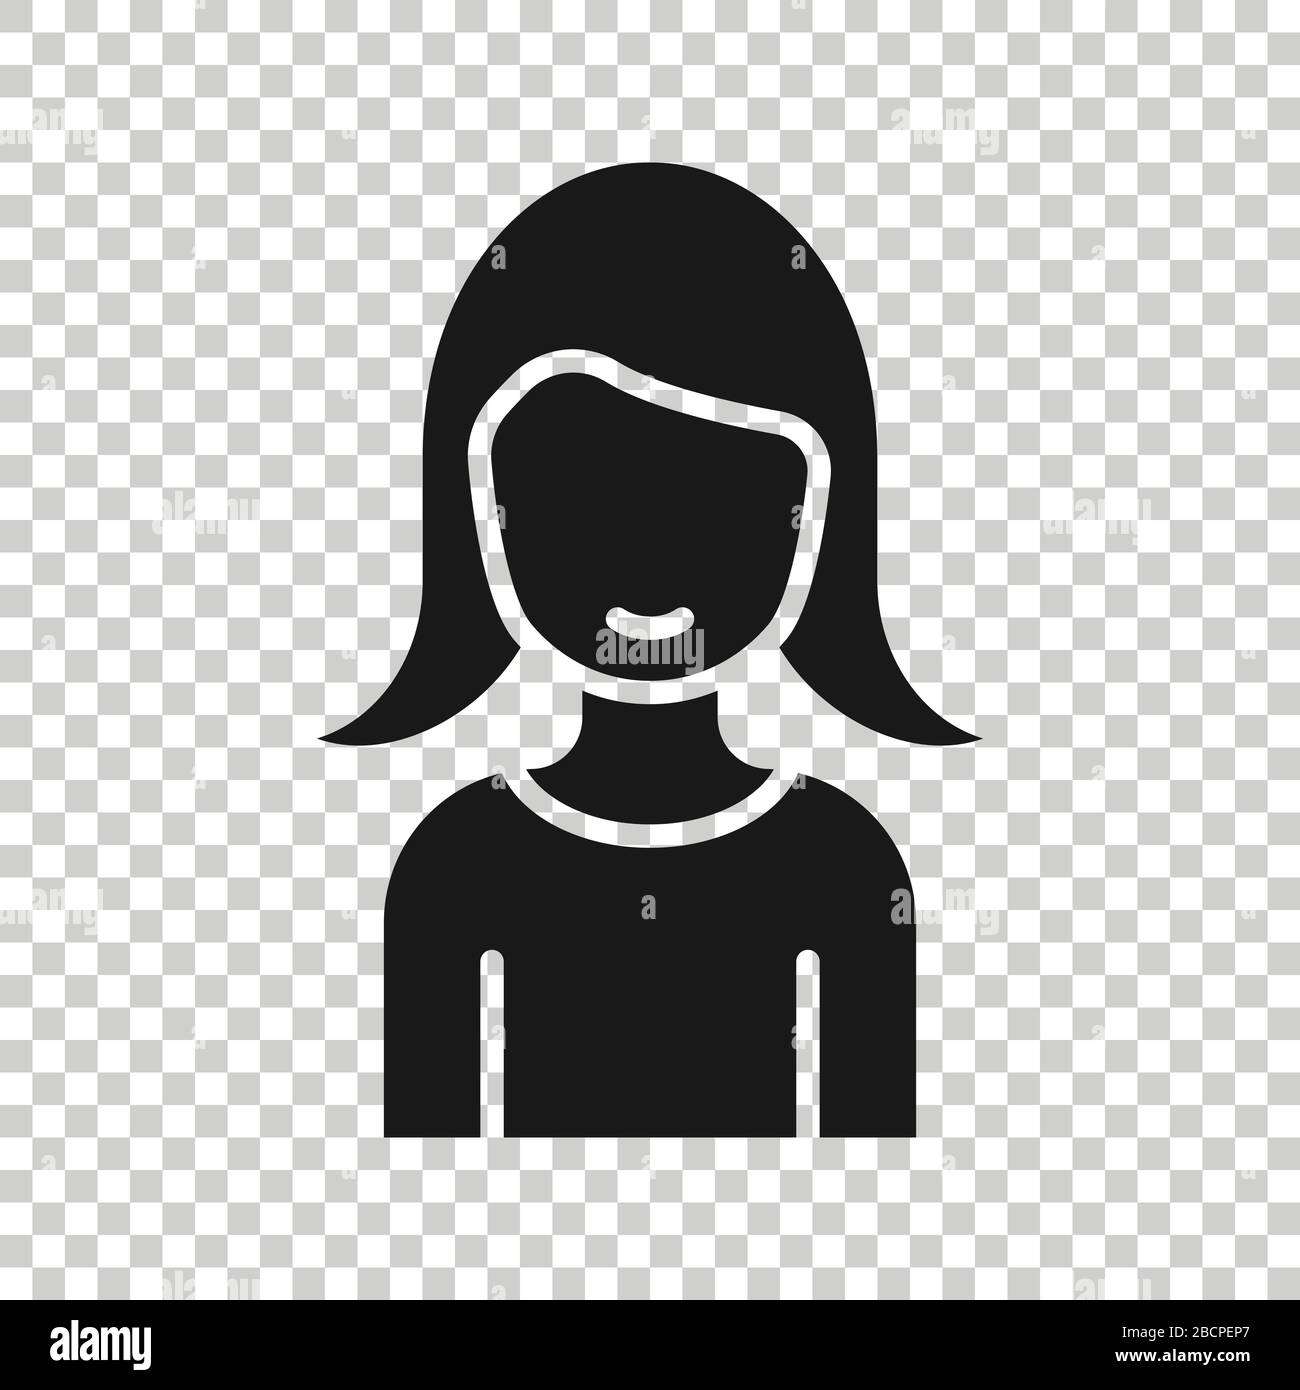 Woman face icon in flat style. People vector illustration on white background. Partnership business concept. Stock Vector